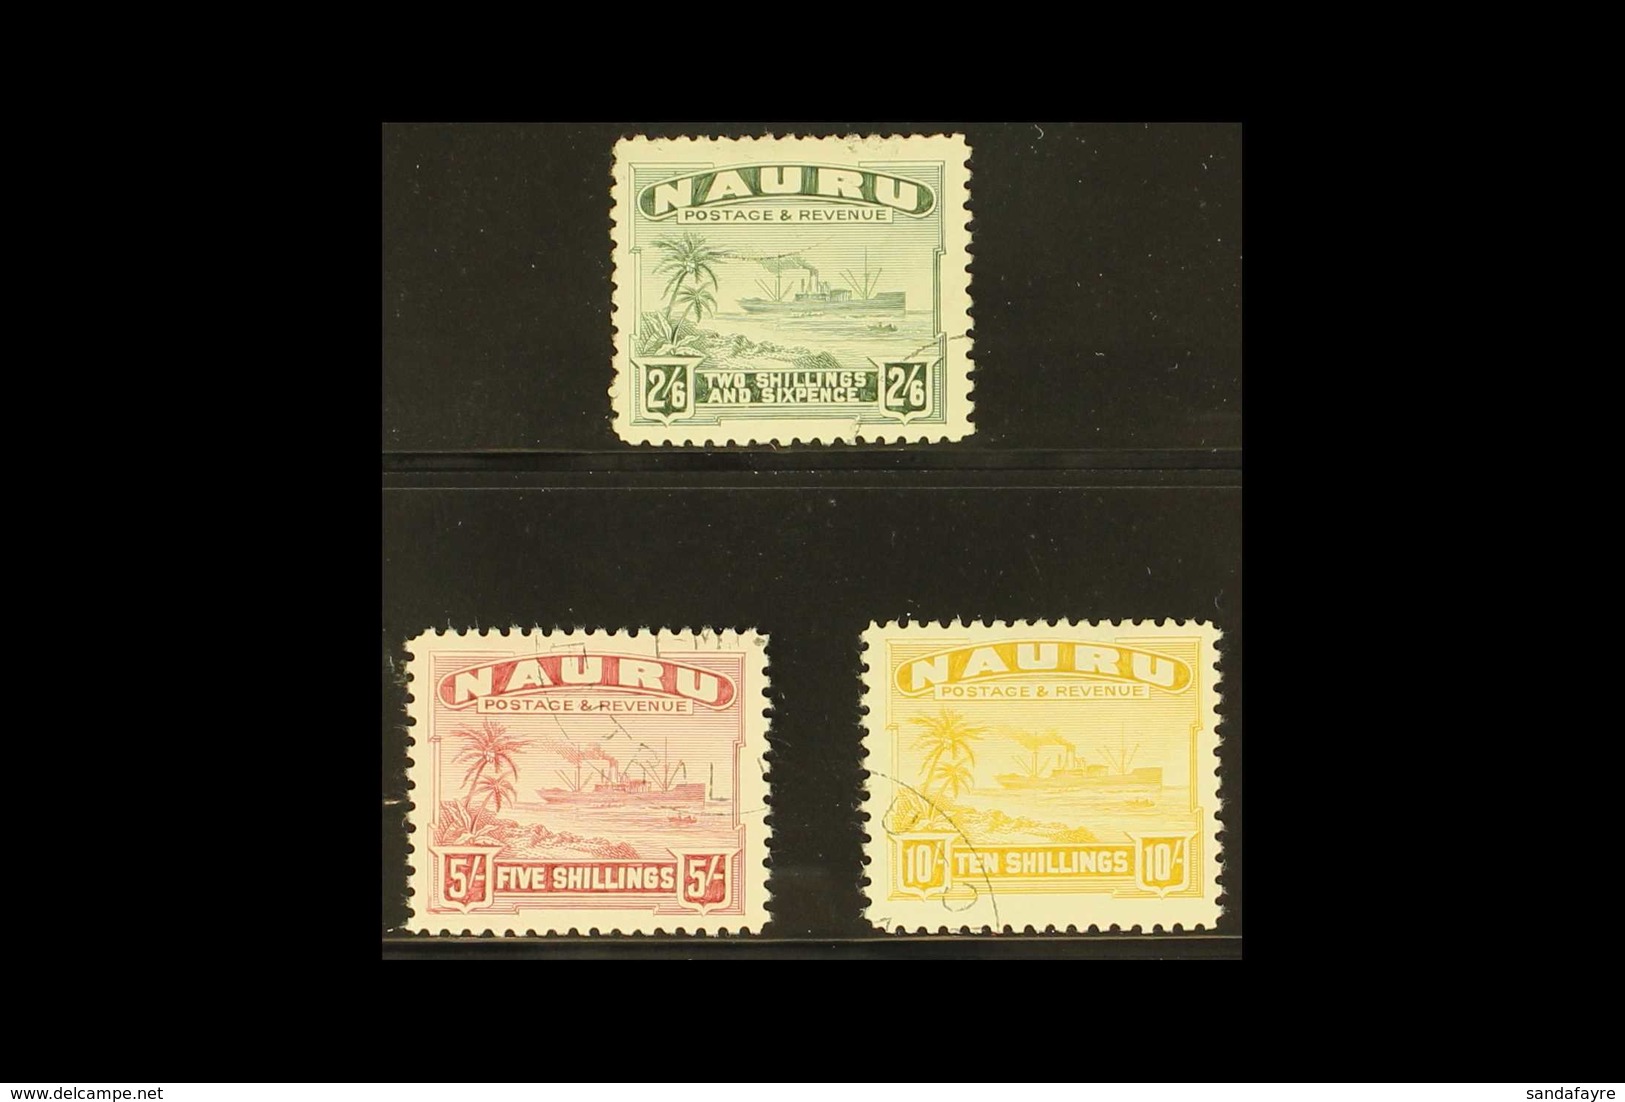 1924-48 2s6d, 5s & 10s Freighter Top Values White Papers, SG 37B/39B, Very Fine Cds Used, Fresh. (3 Stamps) For More Ima - Nauru